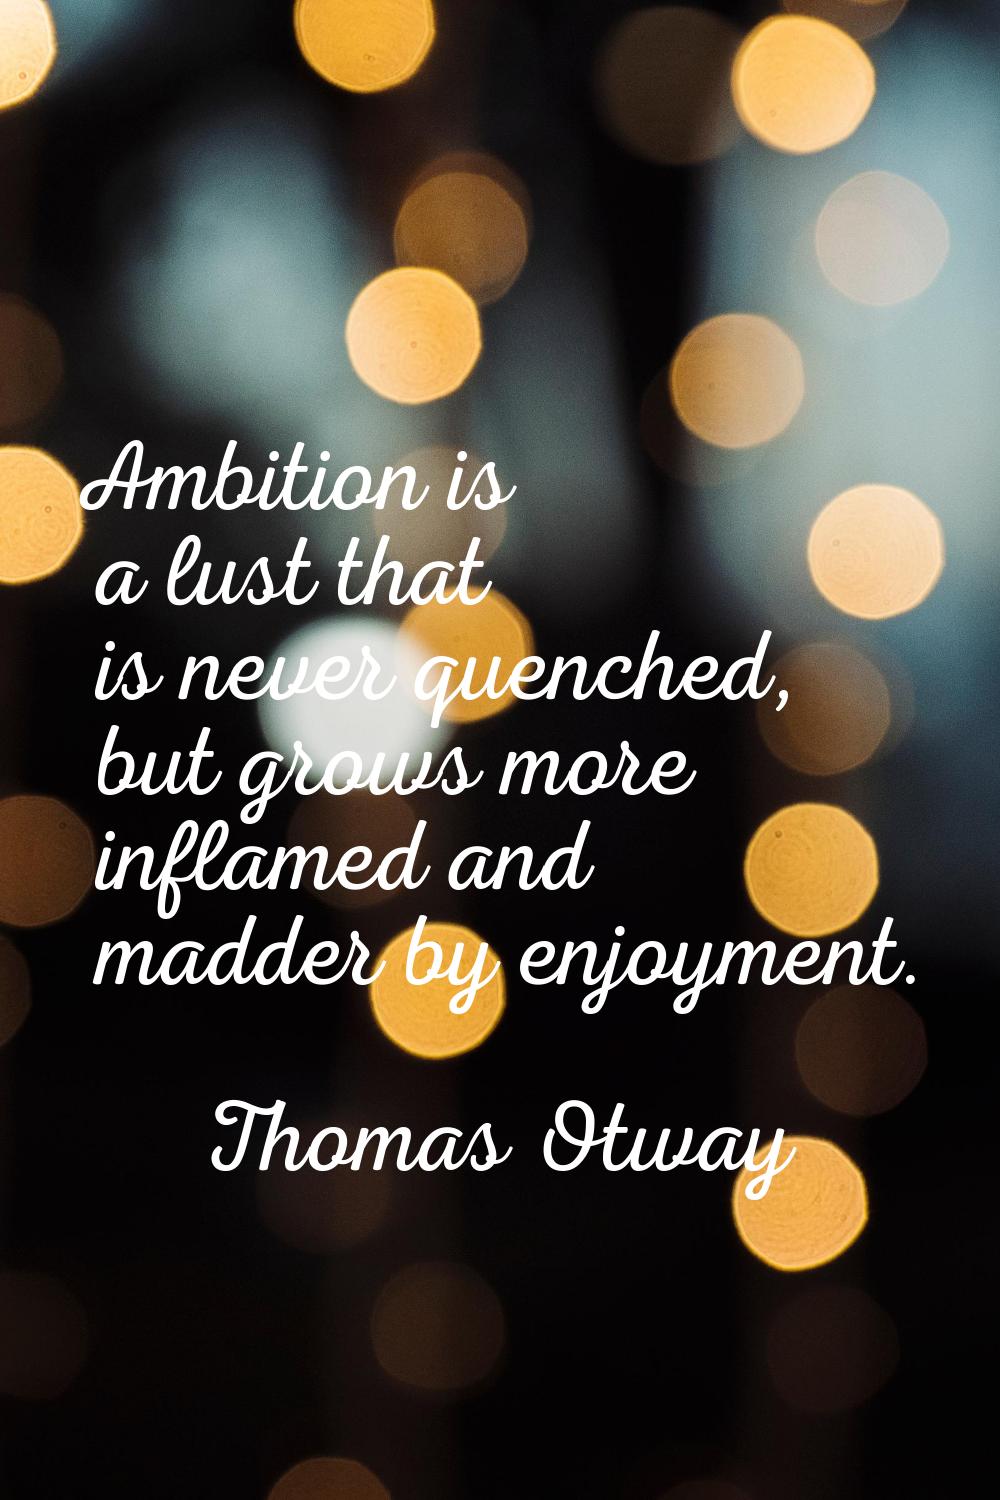 Ambition is a lust that is never quenched, but grows more inflamed and madder by enjoyment.